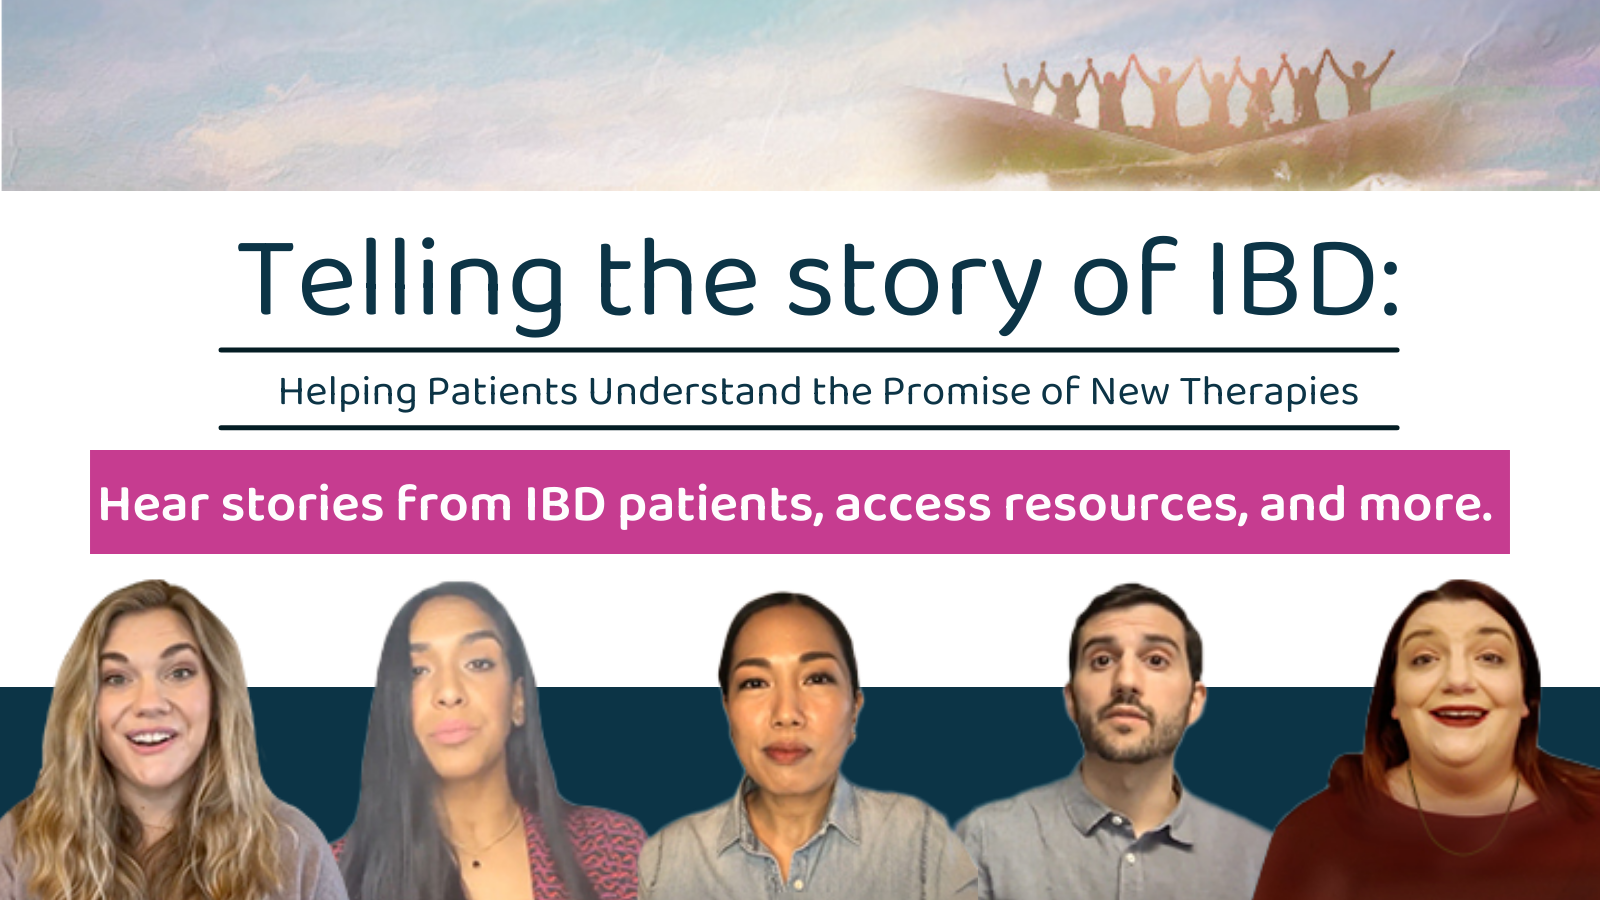 Telling the story of IBD: Helping Patients understand the Promise of New Therapies